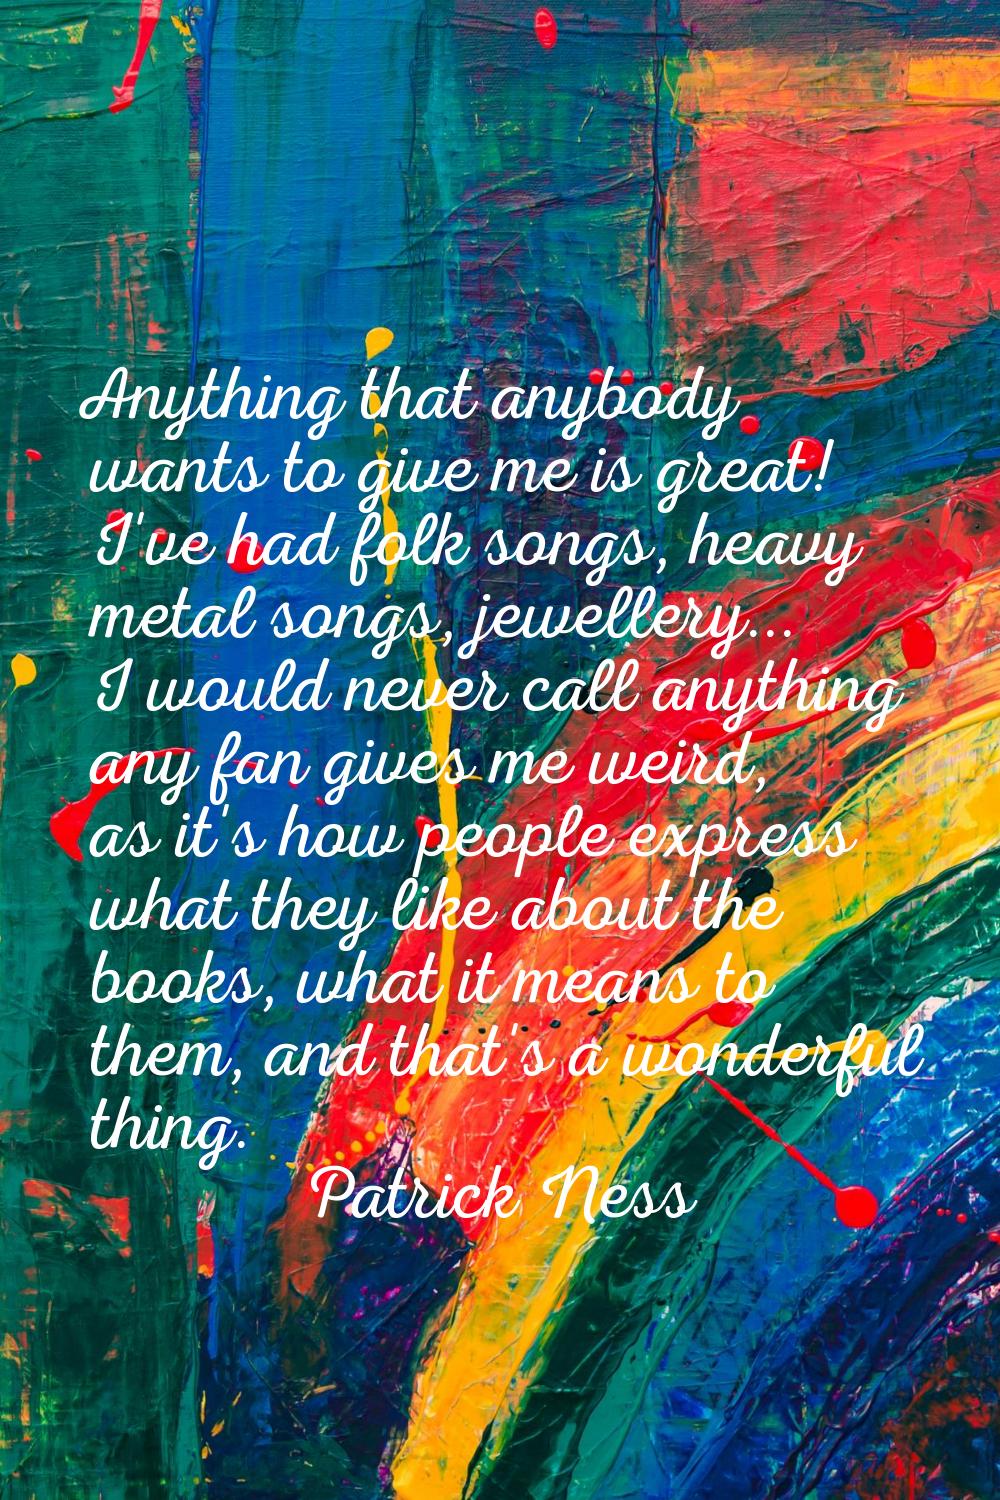 Anything that anybody wants to give me is great! I've had folk songs, heavy metal songs, jewellery.